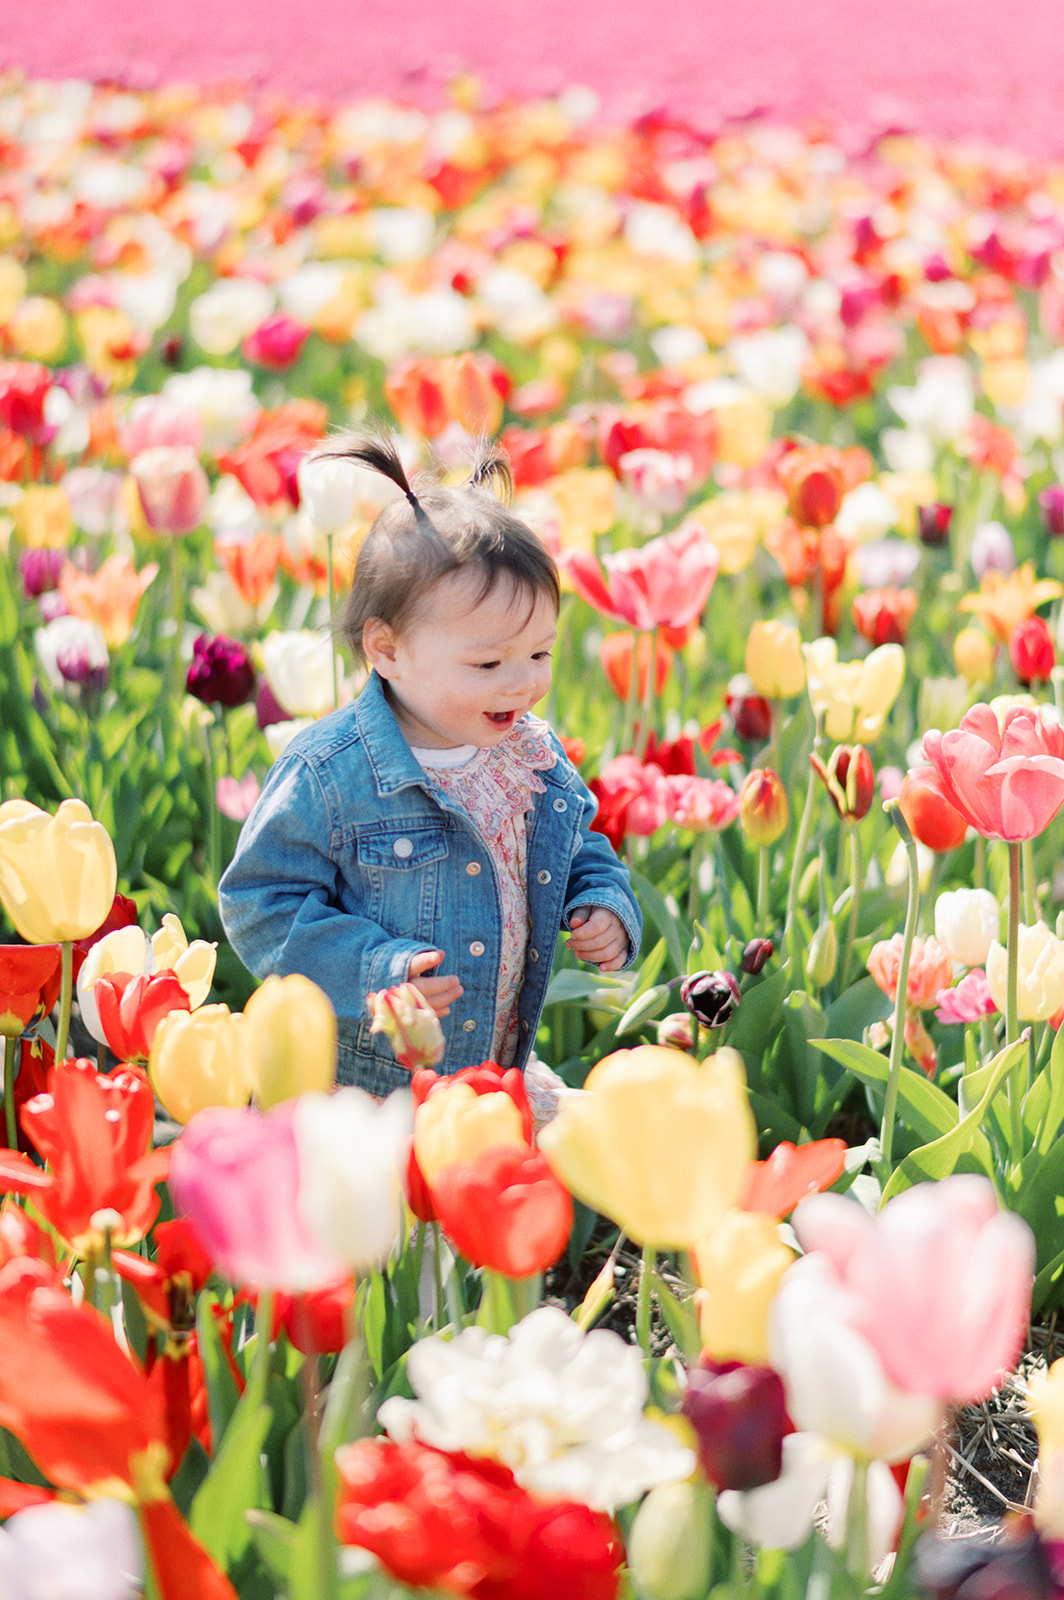 A tulip fields photoshoot in Amsterdam